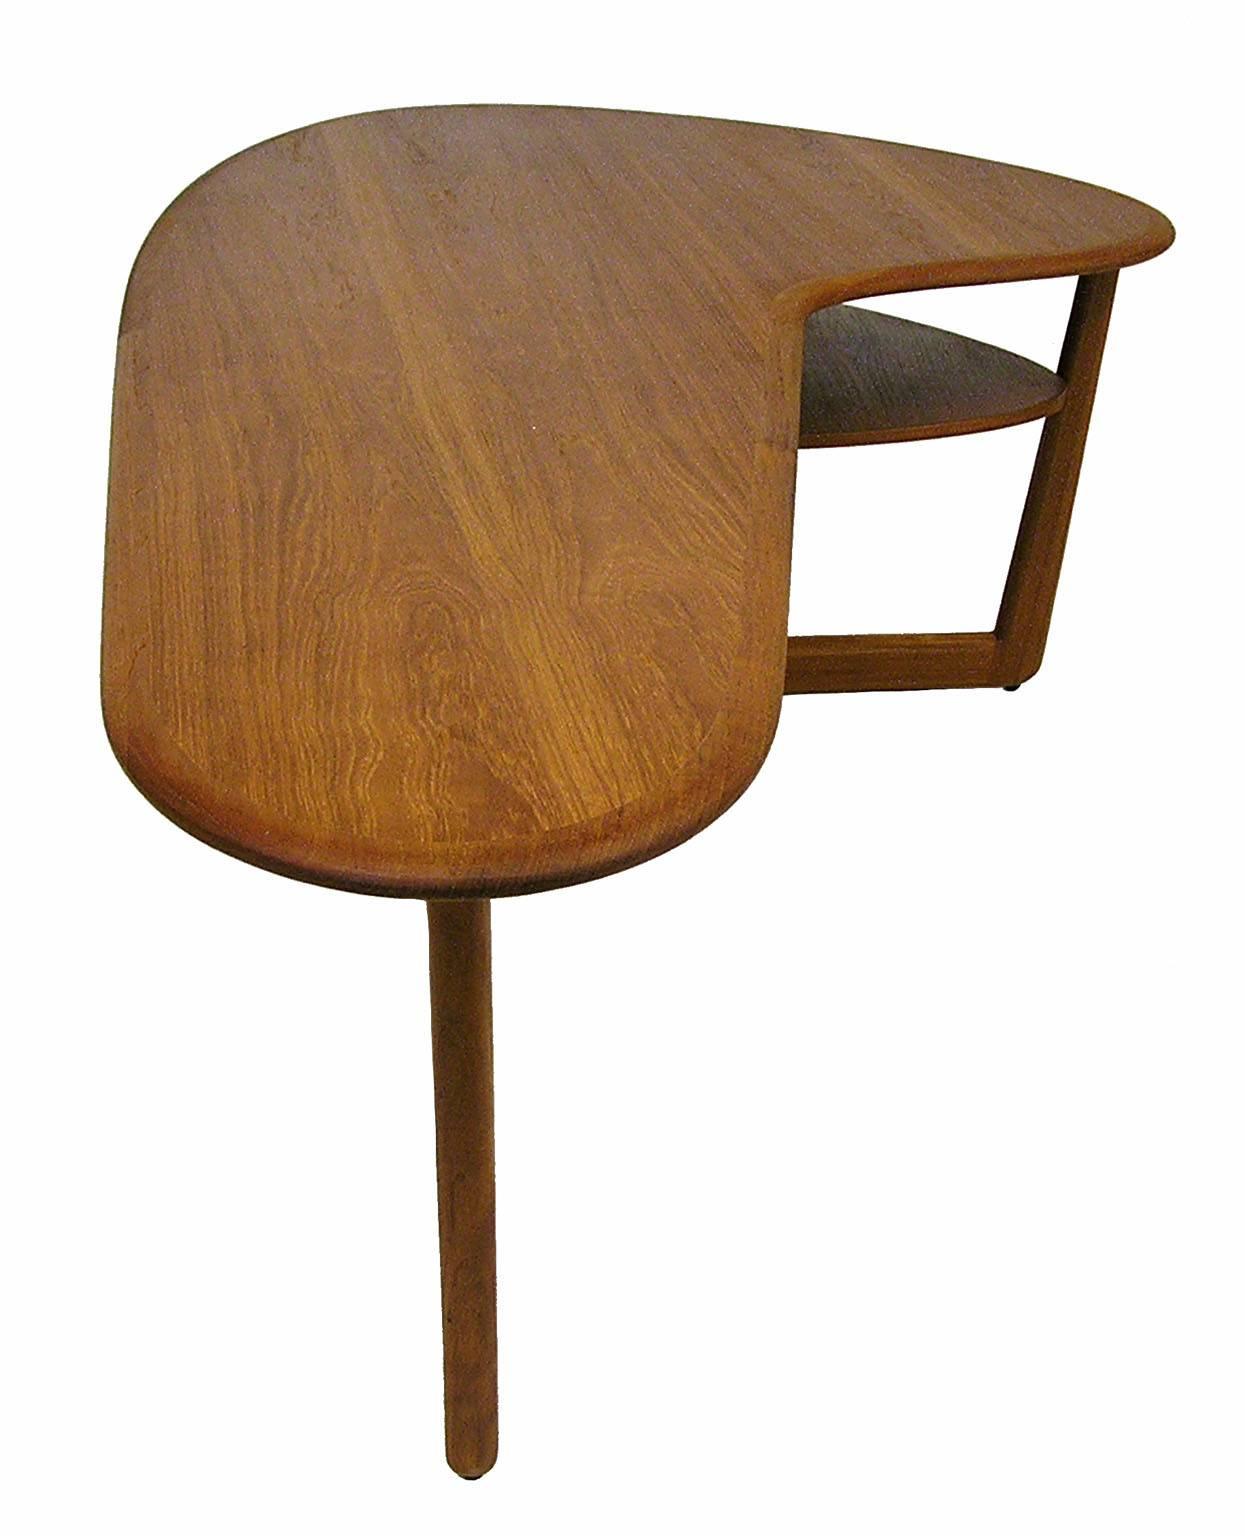 1960s Stylish Kidney Shaped Teak Coffee Table In Excellent Condition In Winnipeg, Manitoba